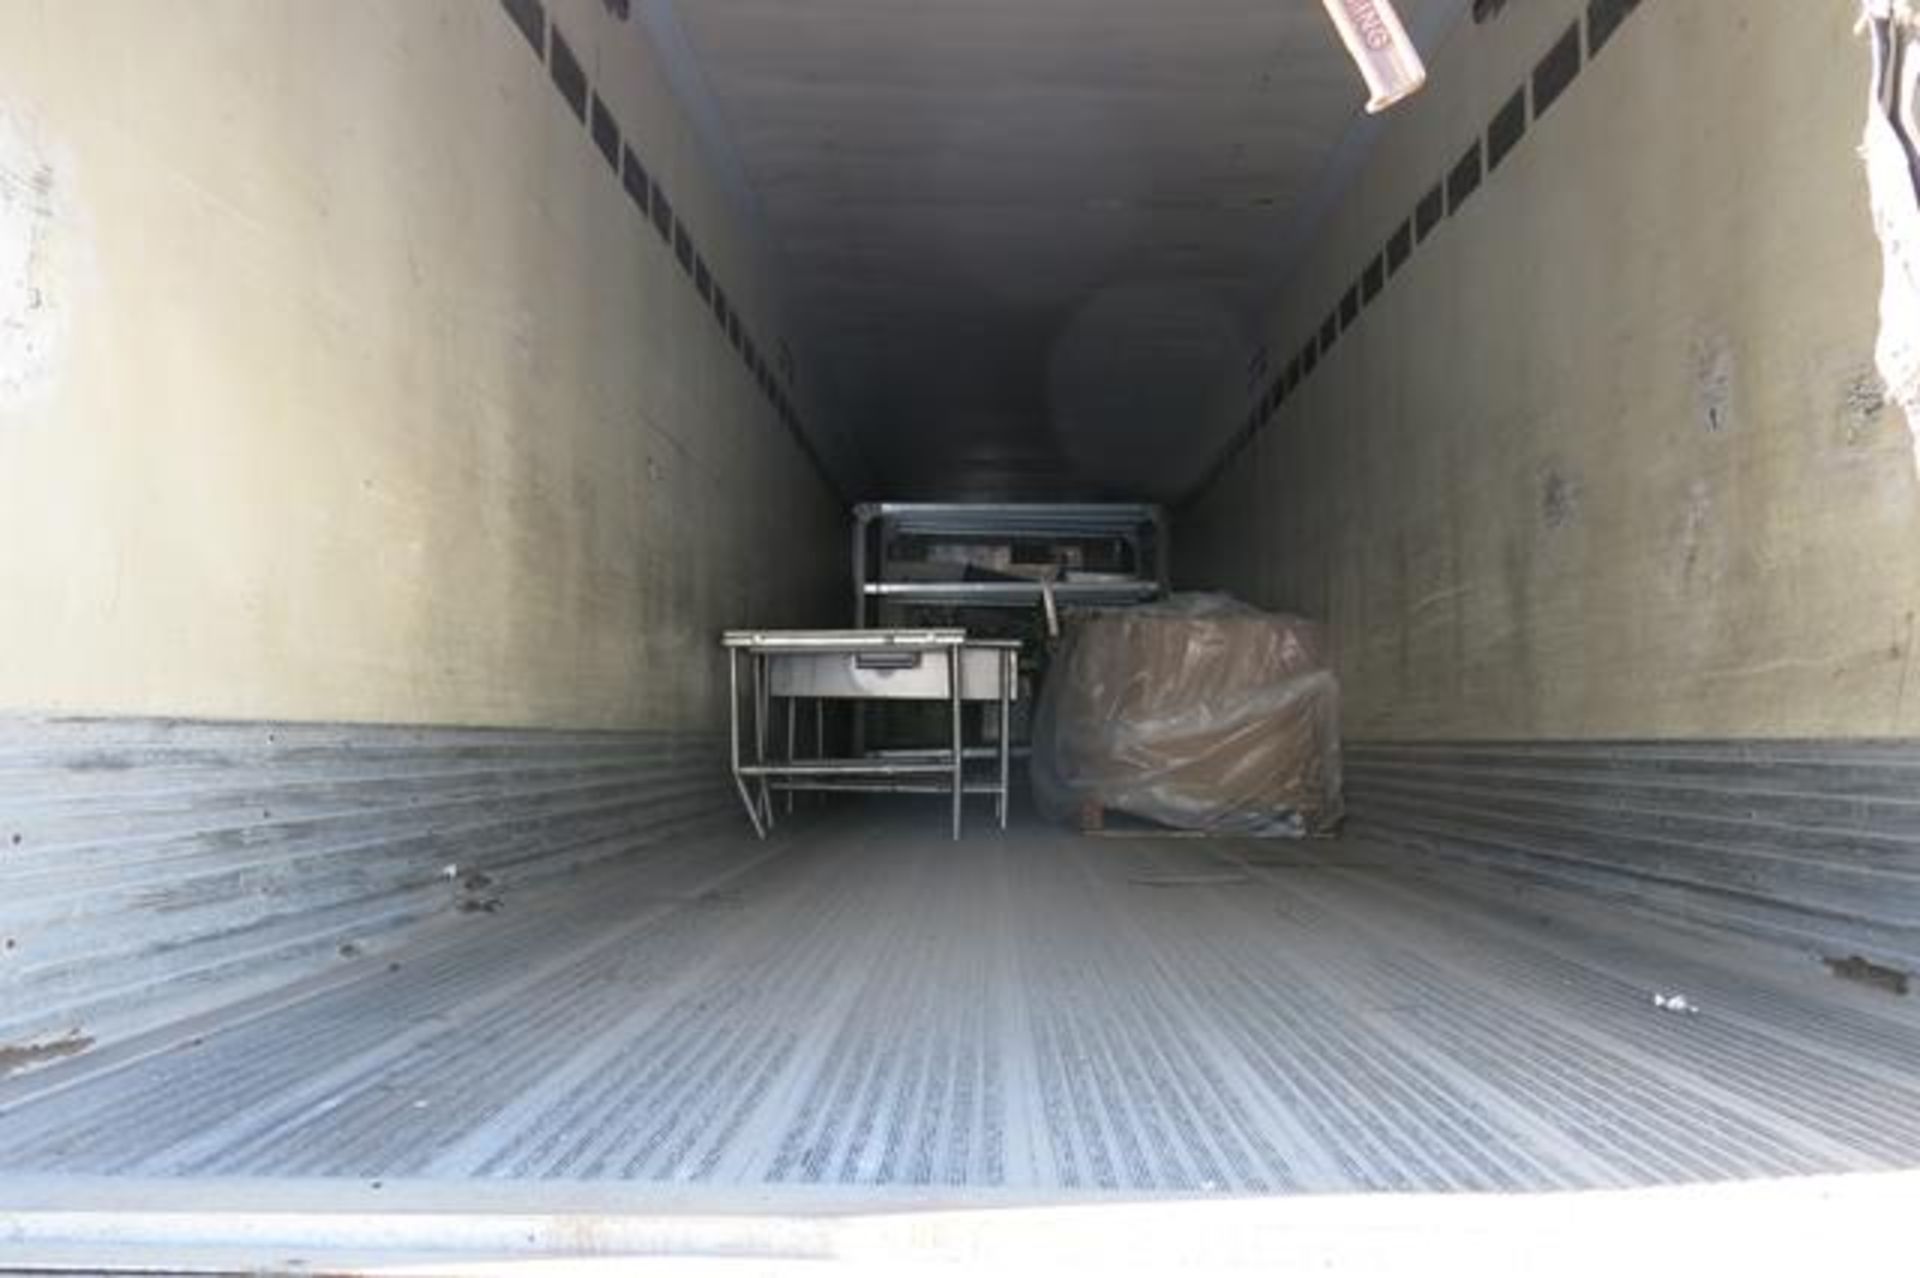 TRAILMOBILE, 53' REFRIGERATED VAN TRAILER, BARN DOORS, THERMO KING, SB-210, REEFER, 14,880 HOURS - Image 4 of 12